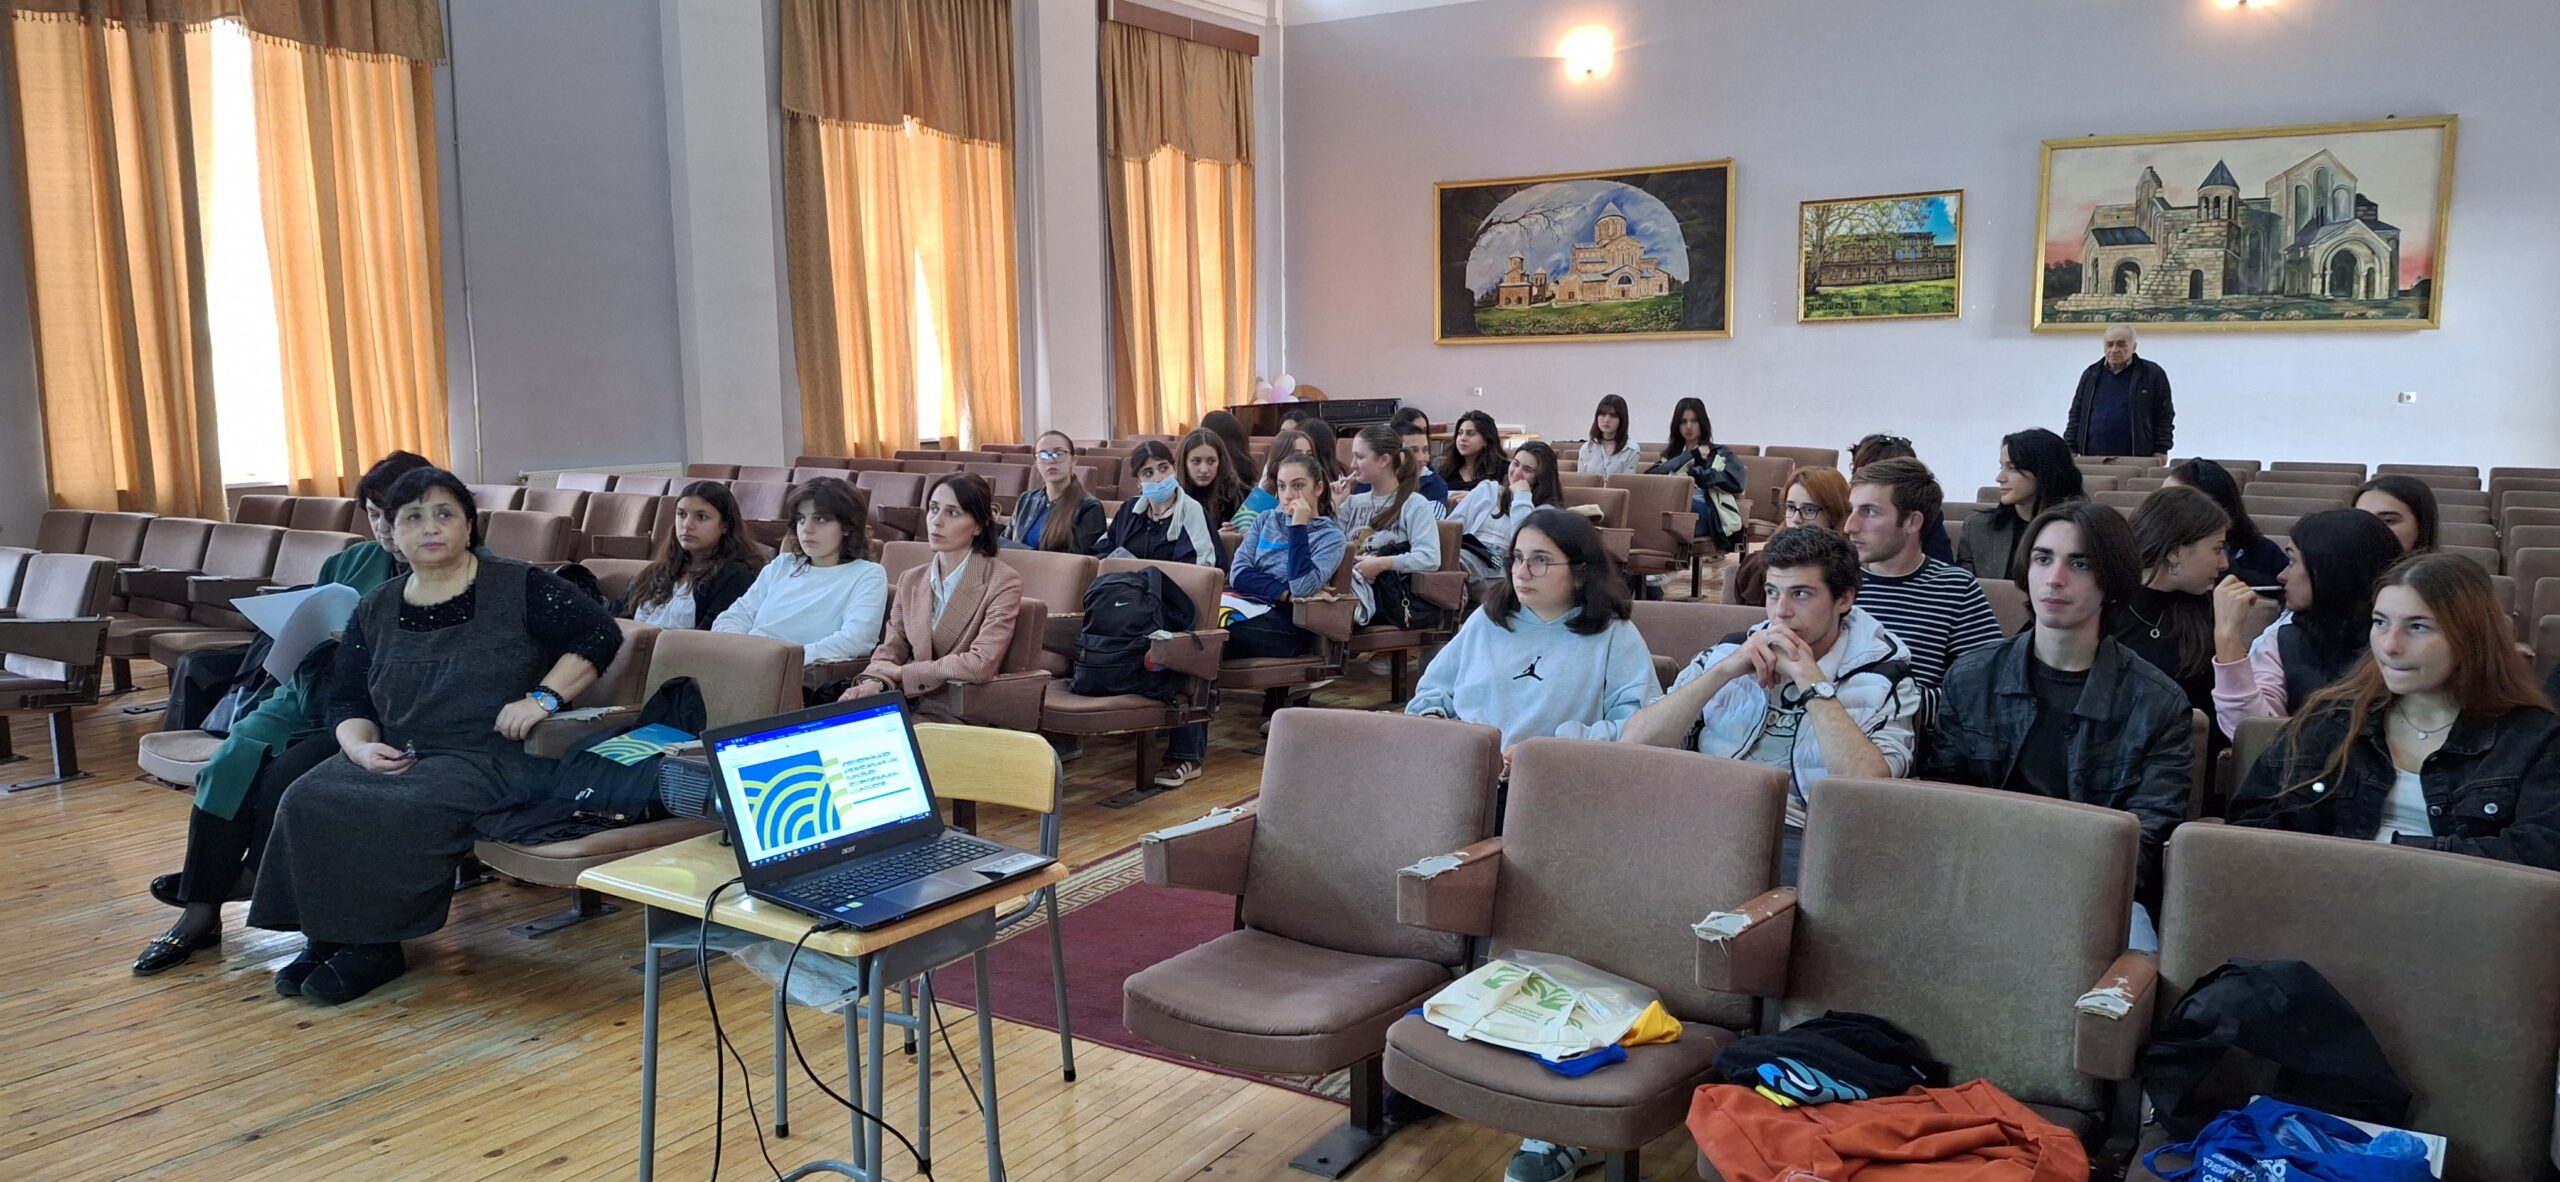 Environmental Awareness Soars at N2 Public School in Kutaisi through “PCB-Free Electricity Distribution” Initiative